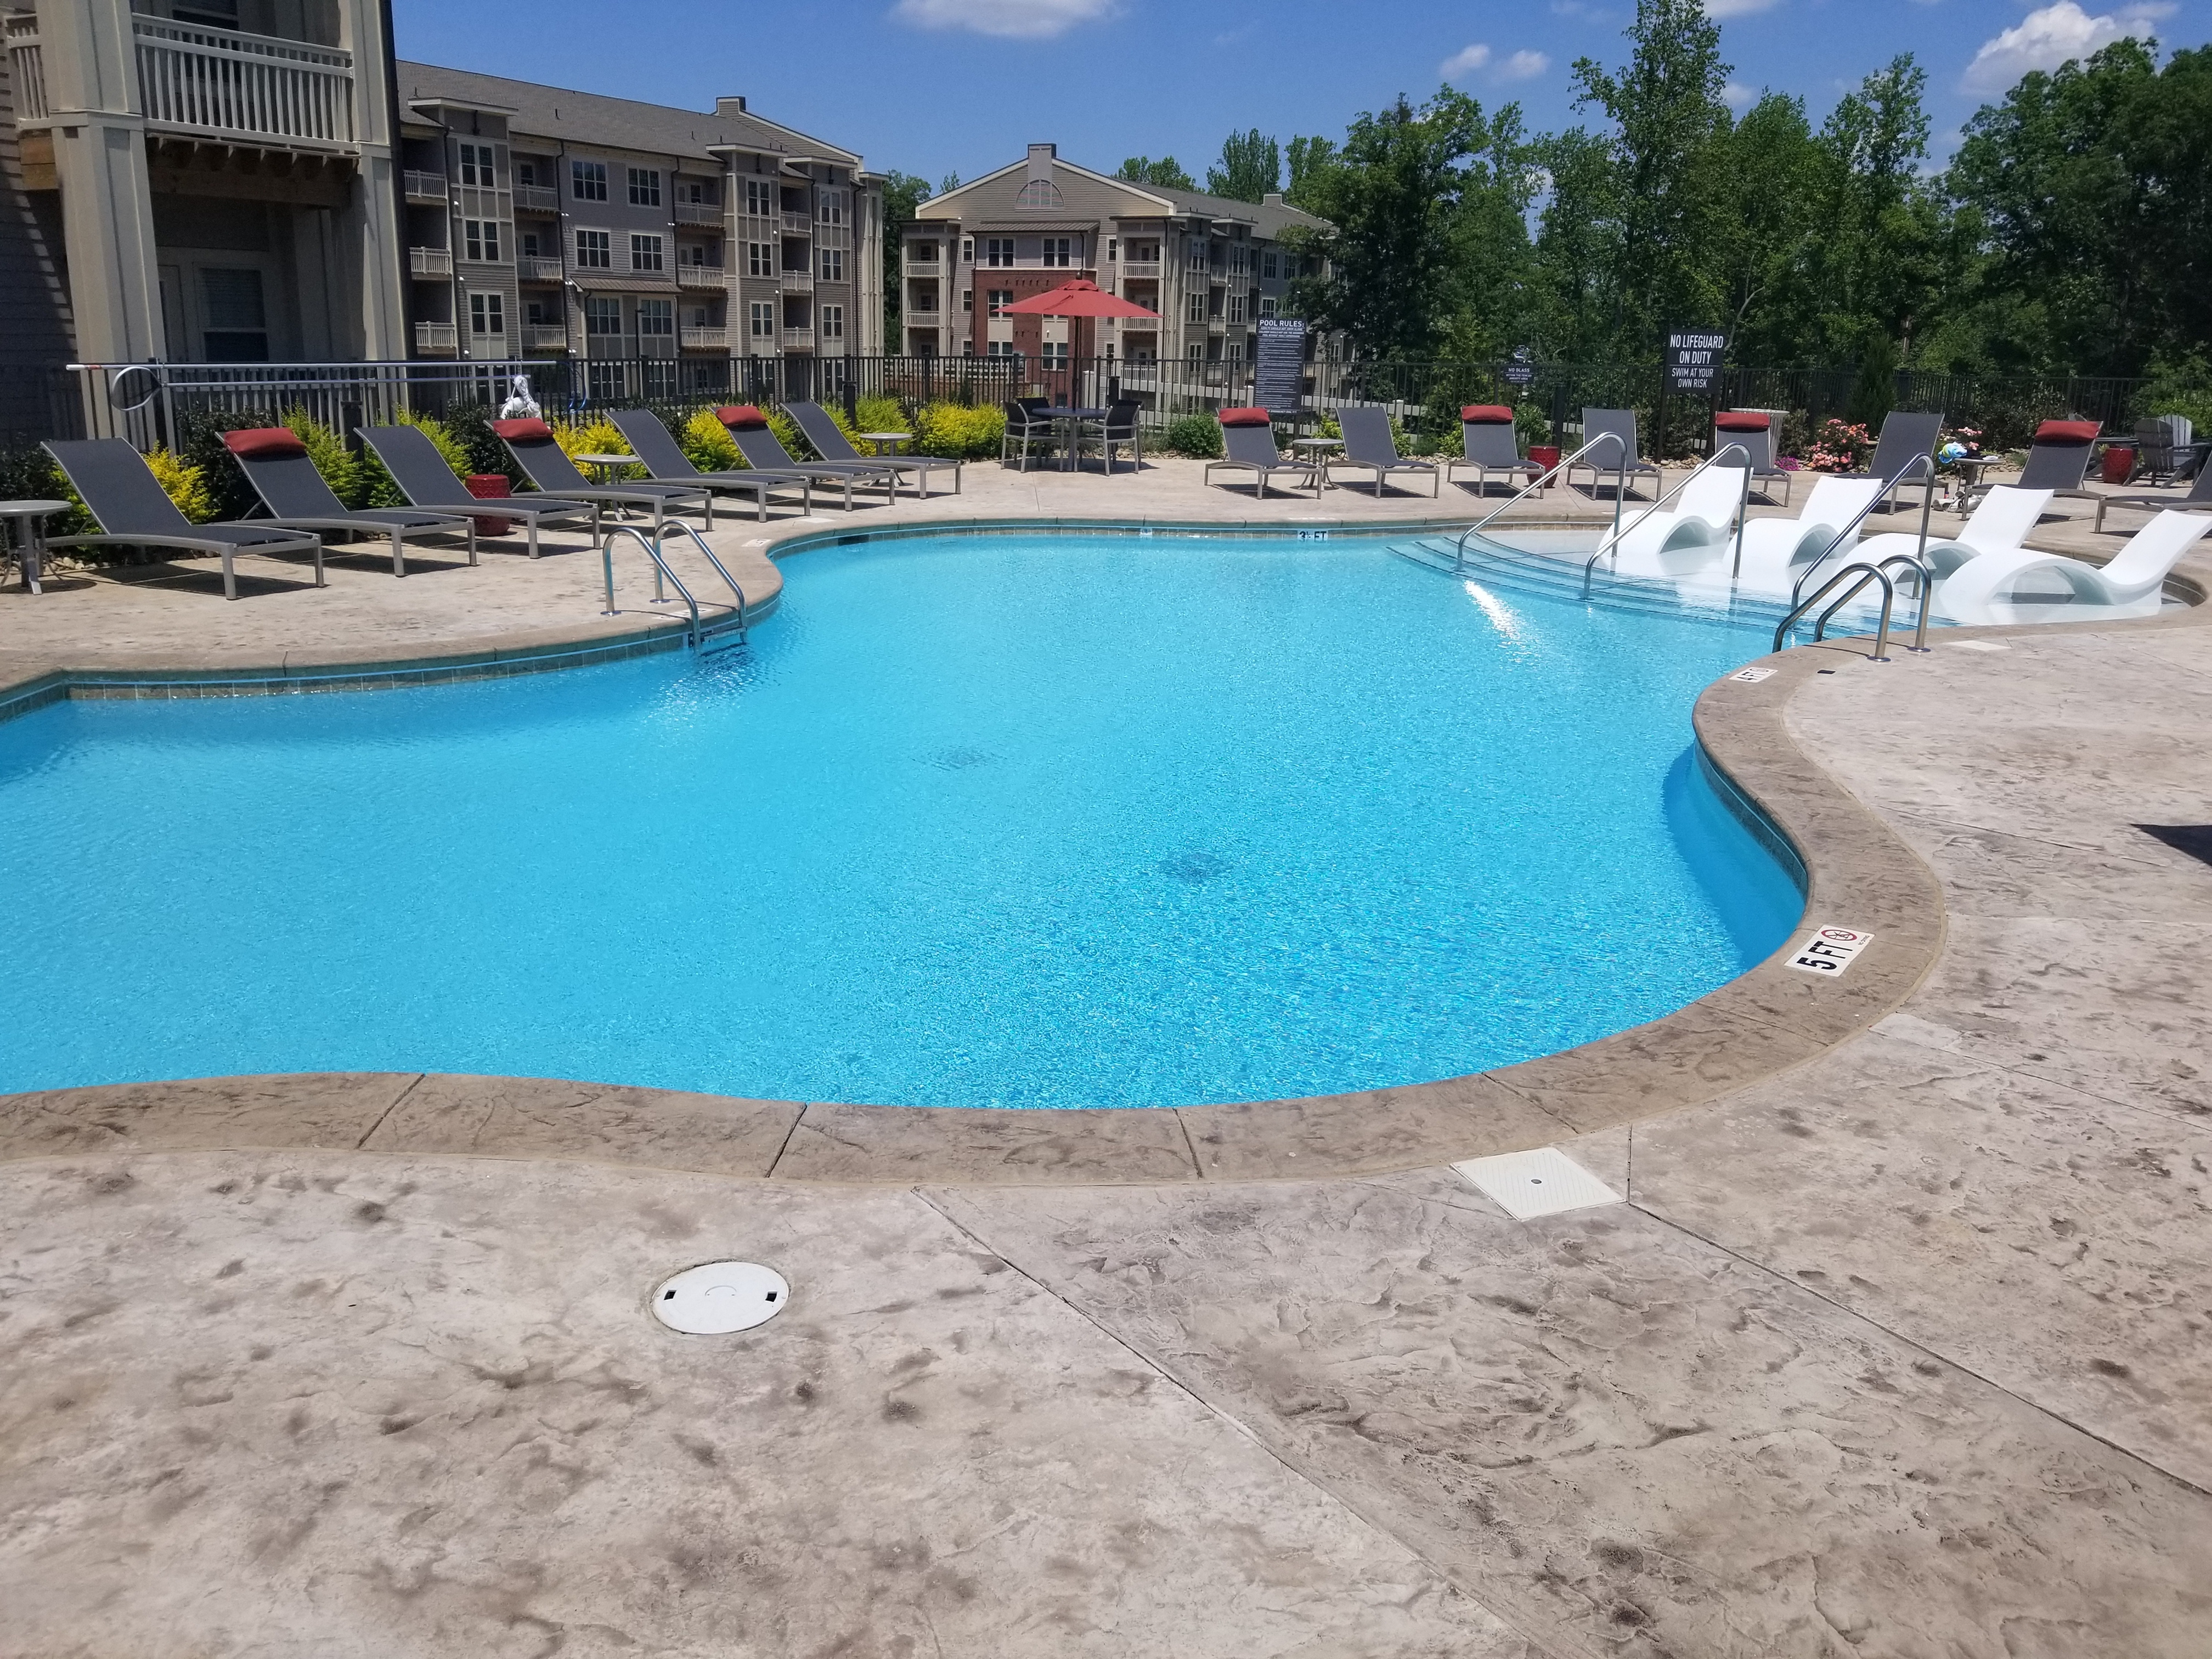 Sparkling Pool | Apartments For Rent Fort Mill SC | Kingsley Apartments